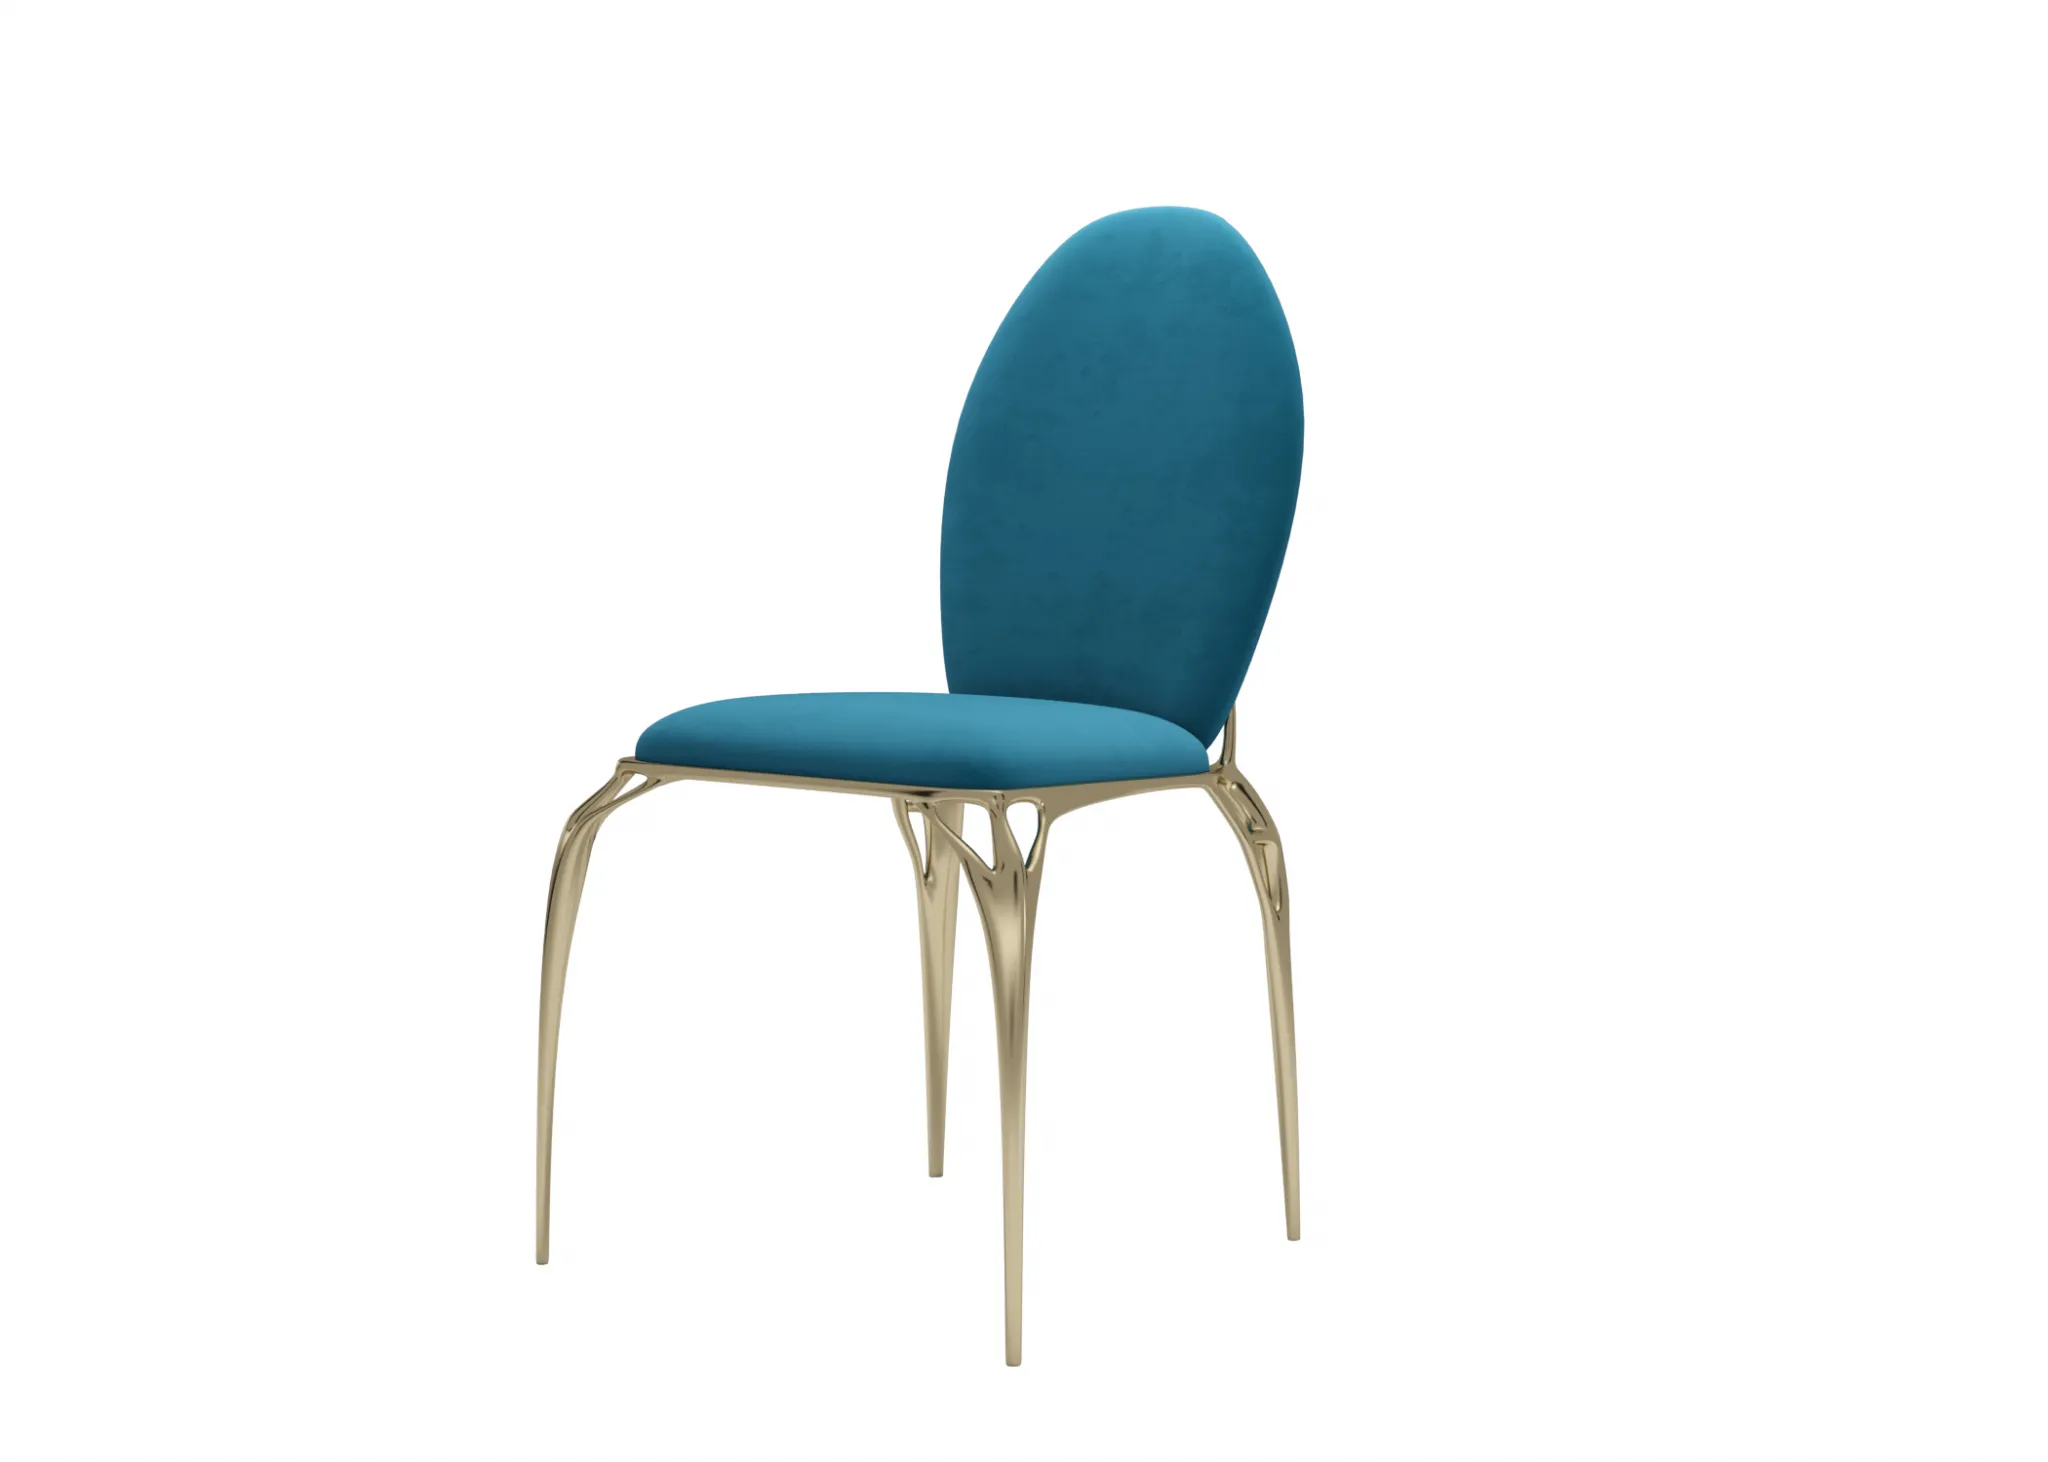 FURNITURE 3D MODELS – CHAIRS – 0432